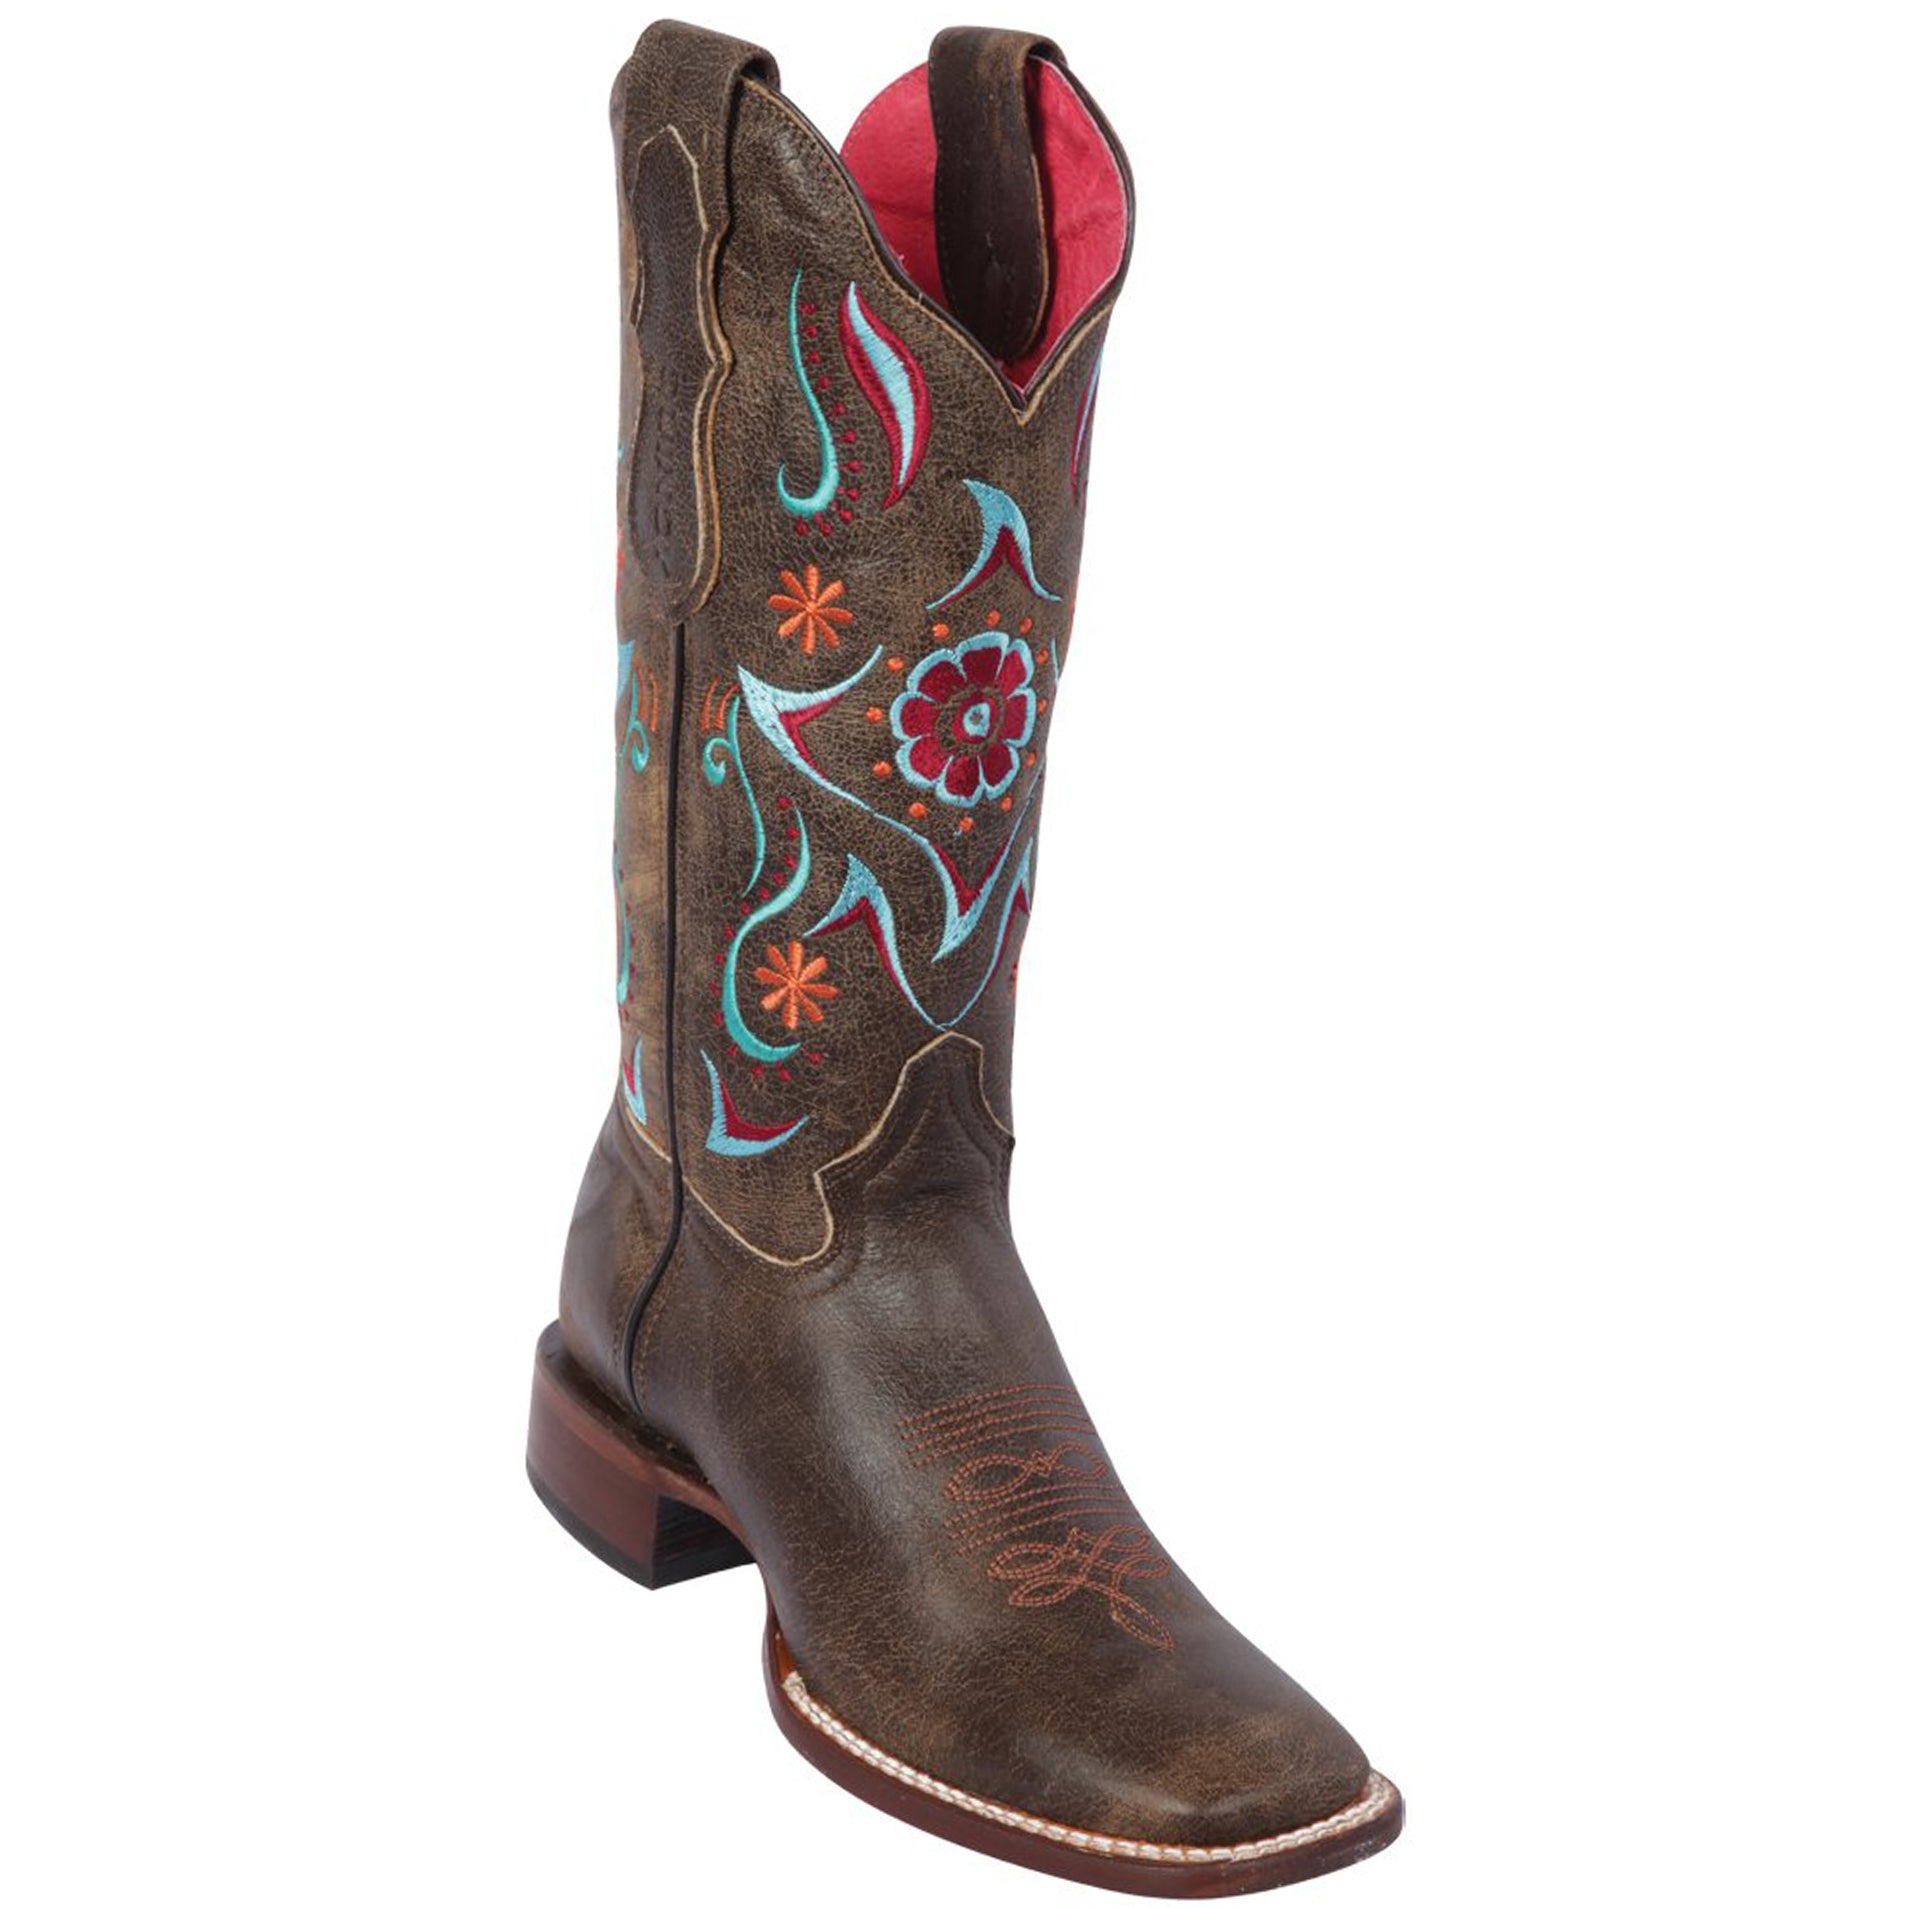 Flower Volcano Tobacco Cowgirl Boots